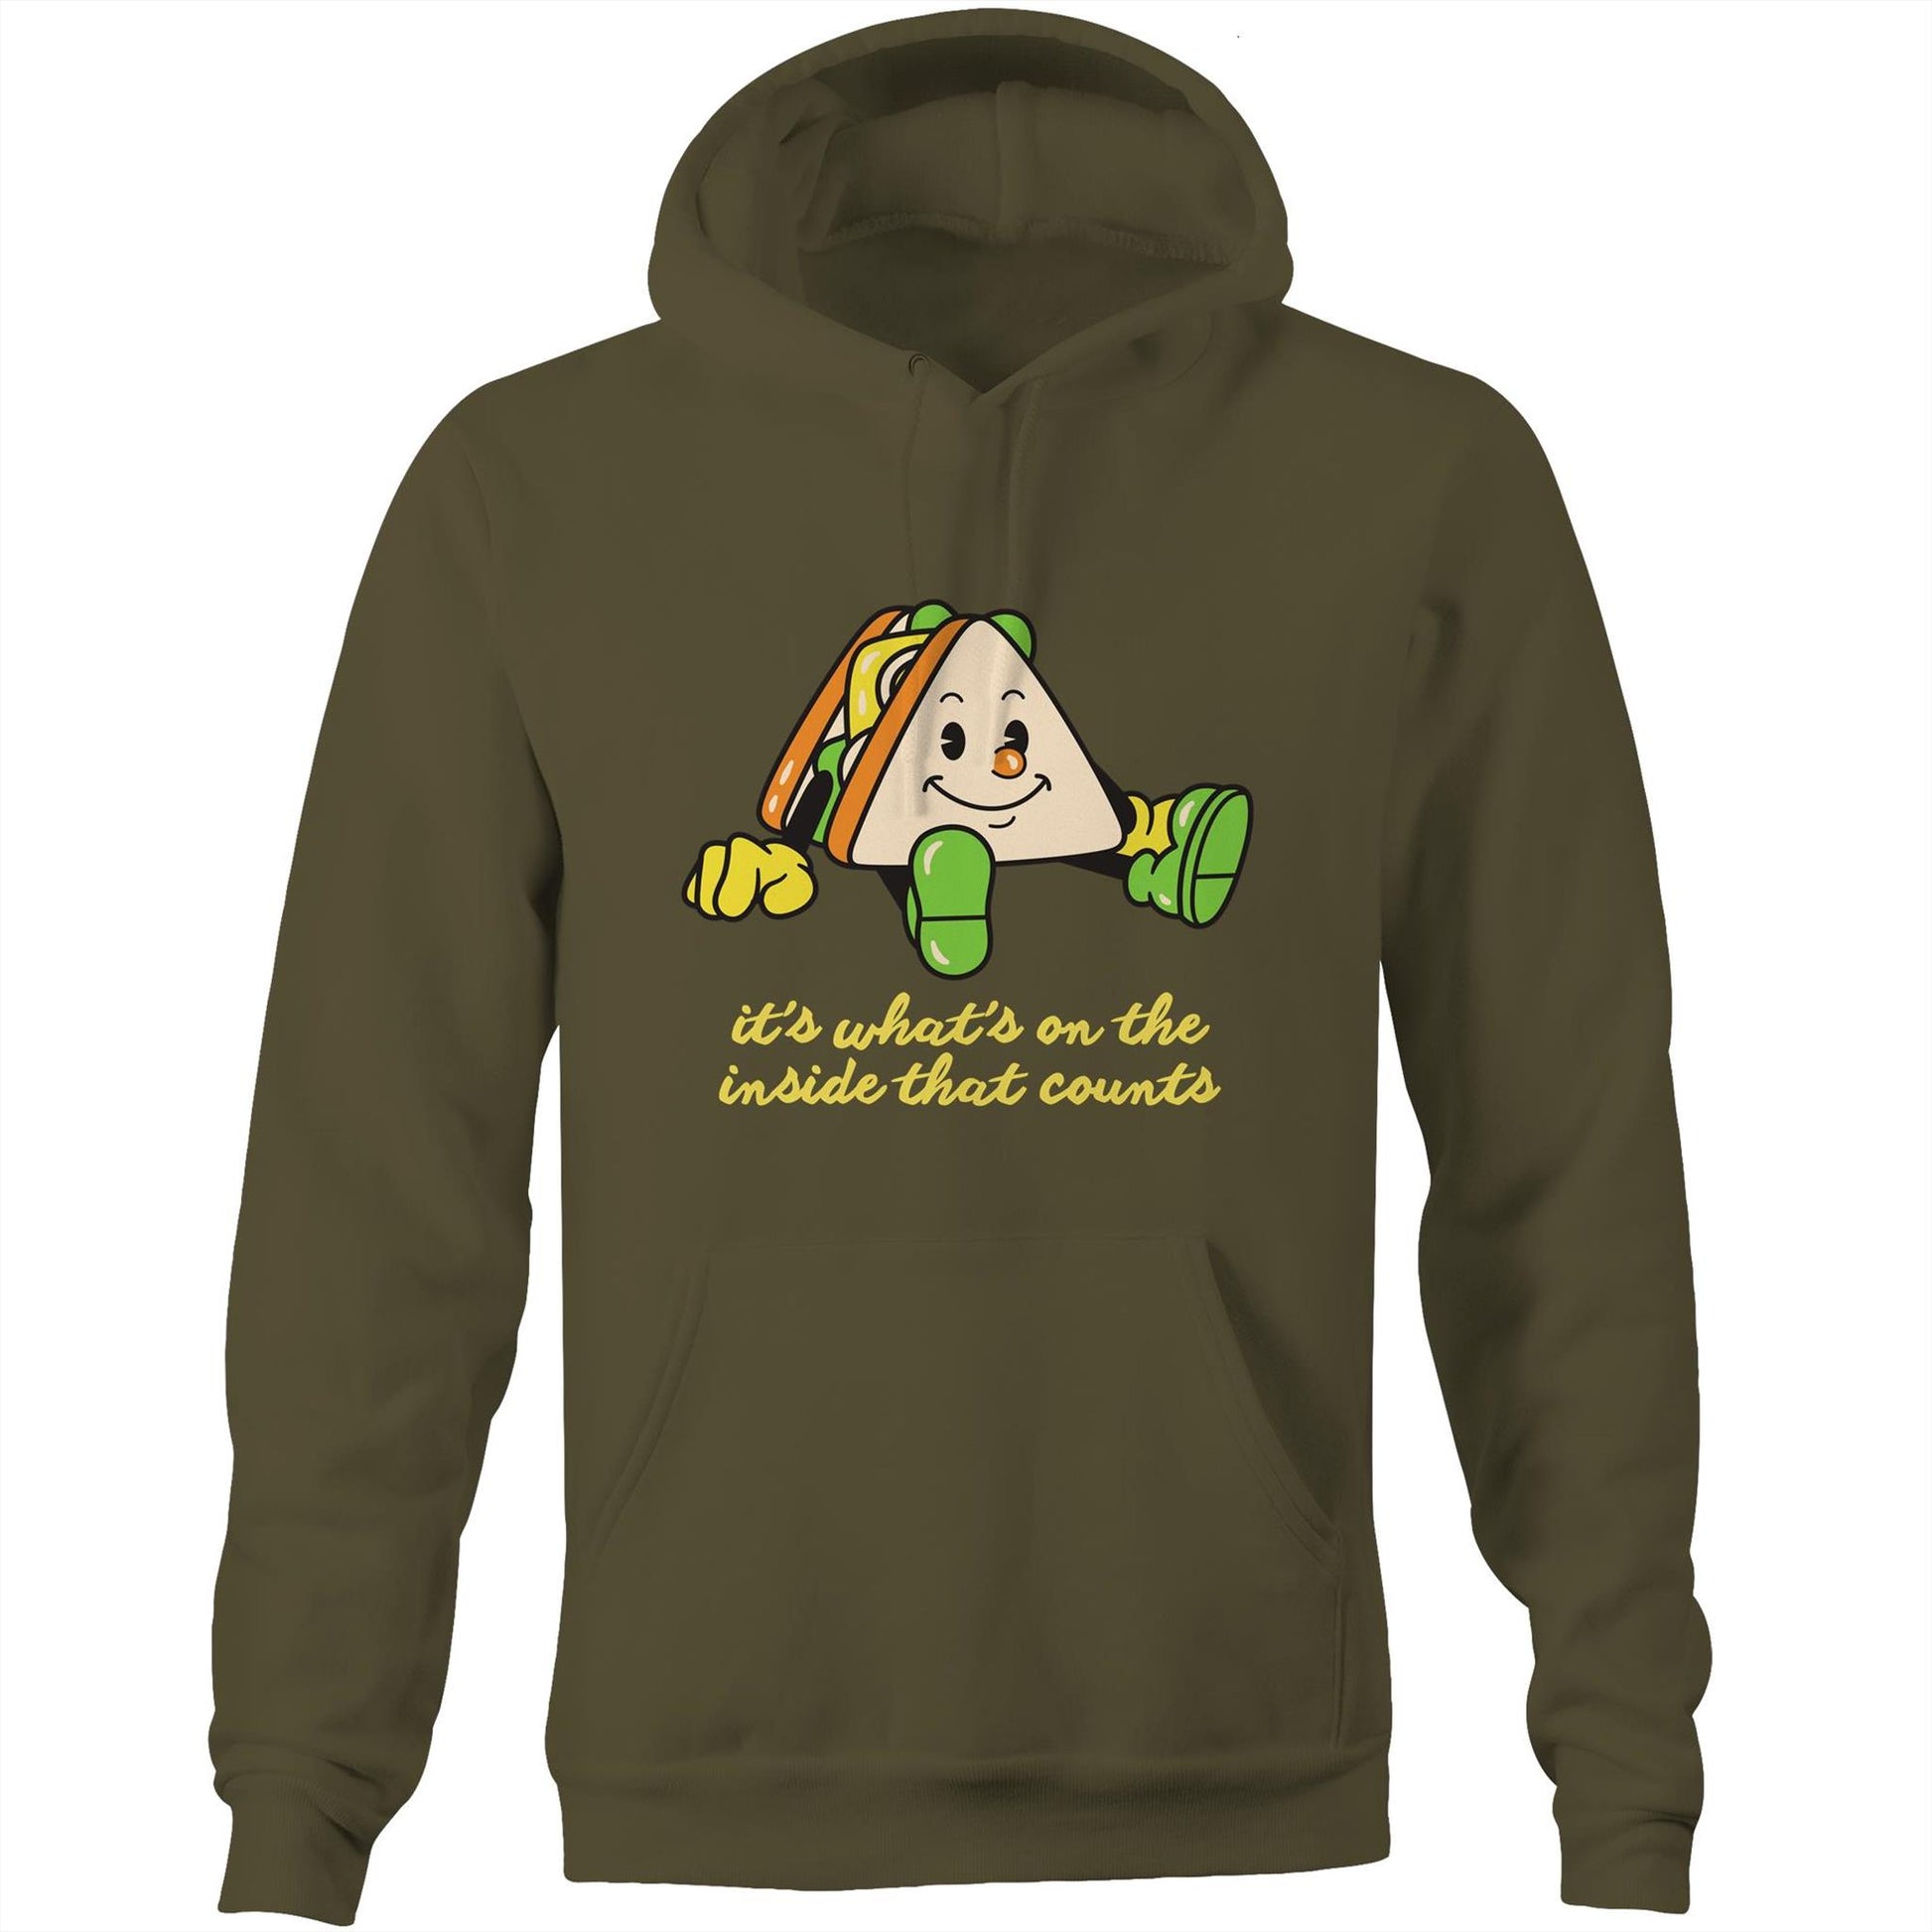 Sandwich, It's What's On The Inside That Counts - Pocket Hoodie Sweatshirt Army Hoodie Food Motivation